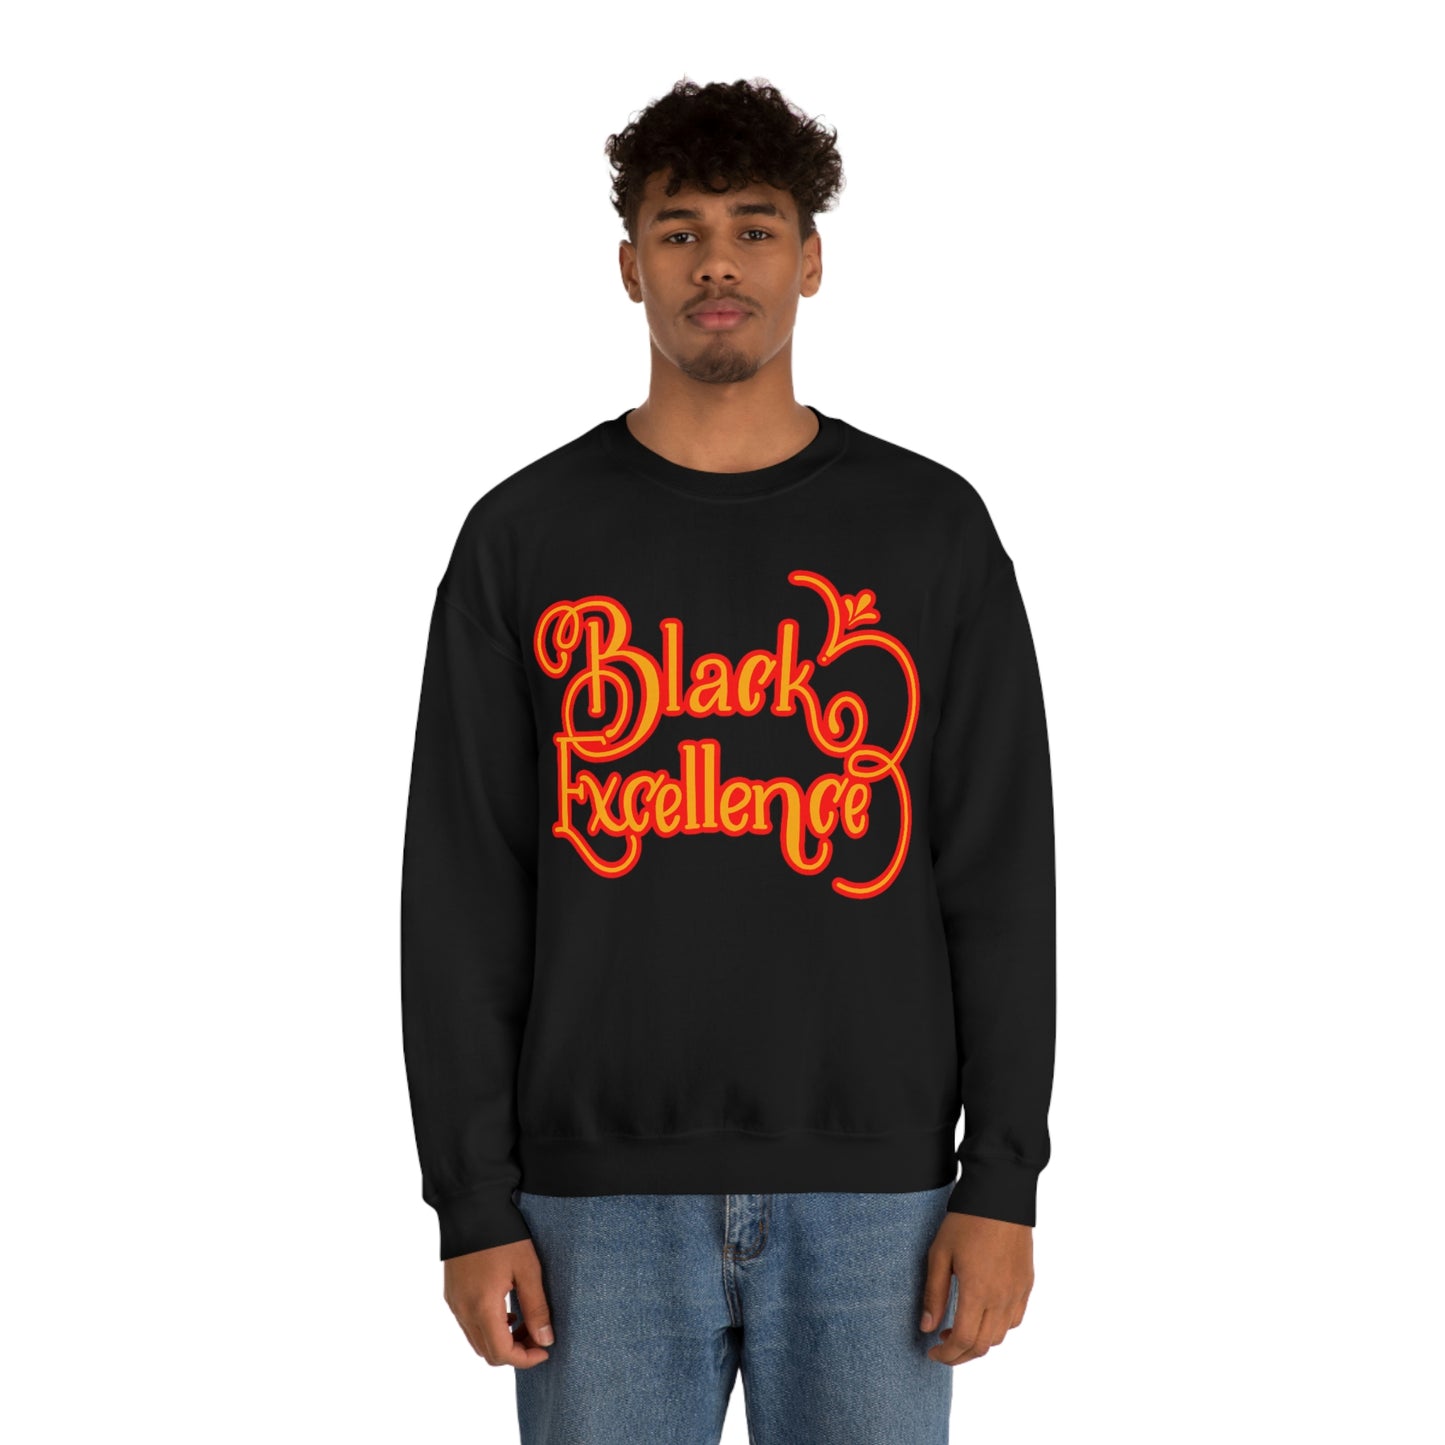 Limited Edition Black Excellence Sweatshirt